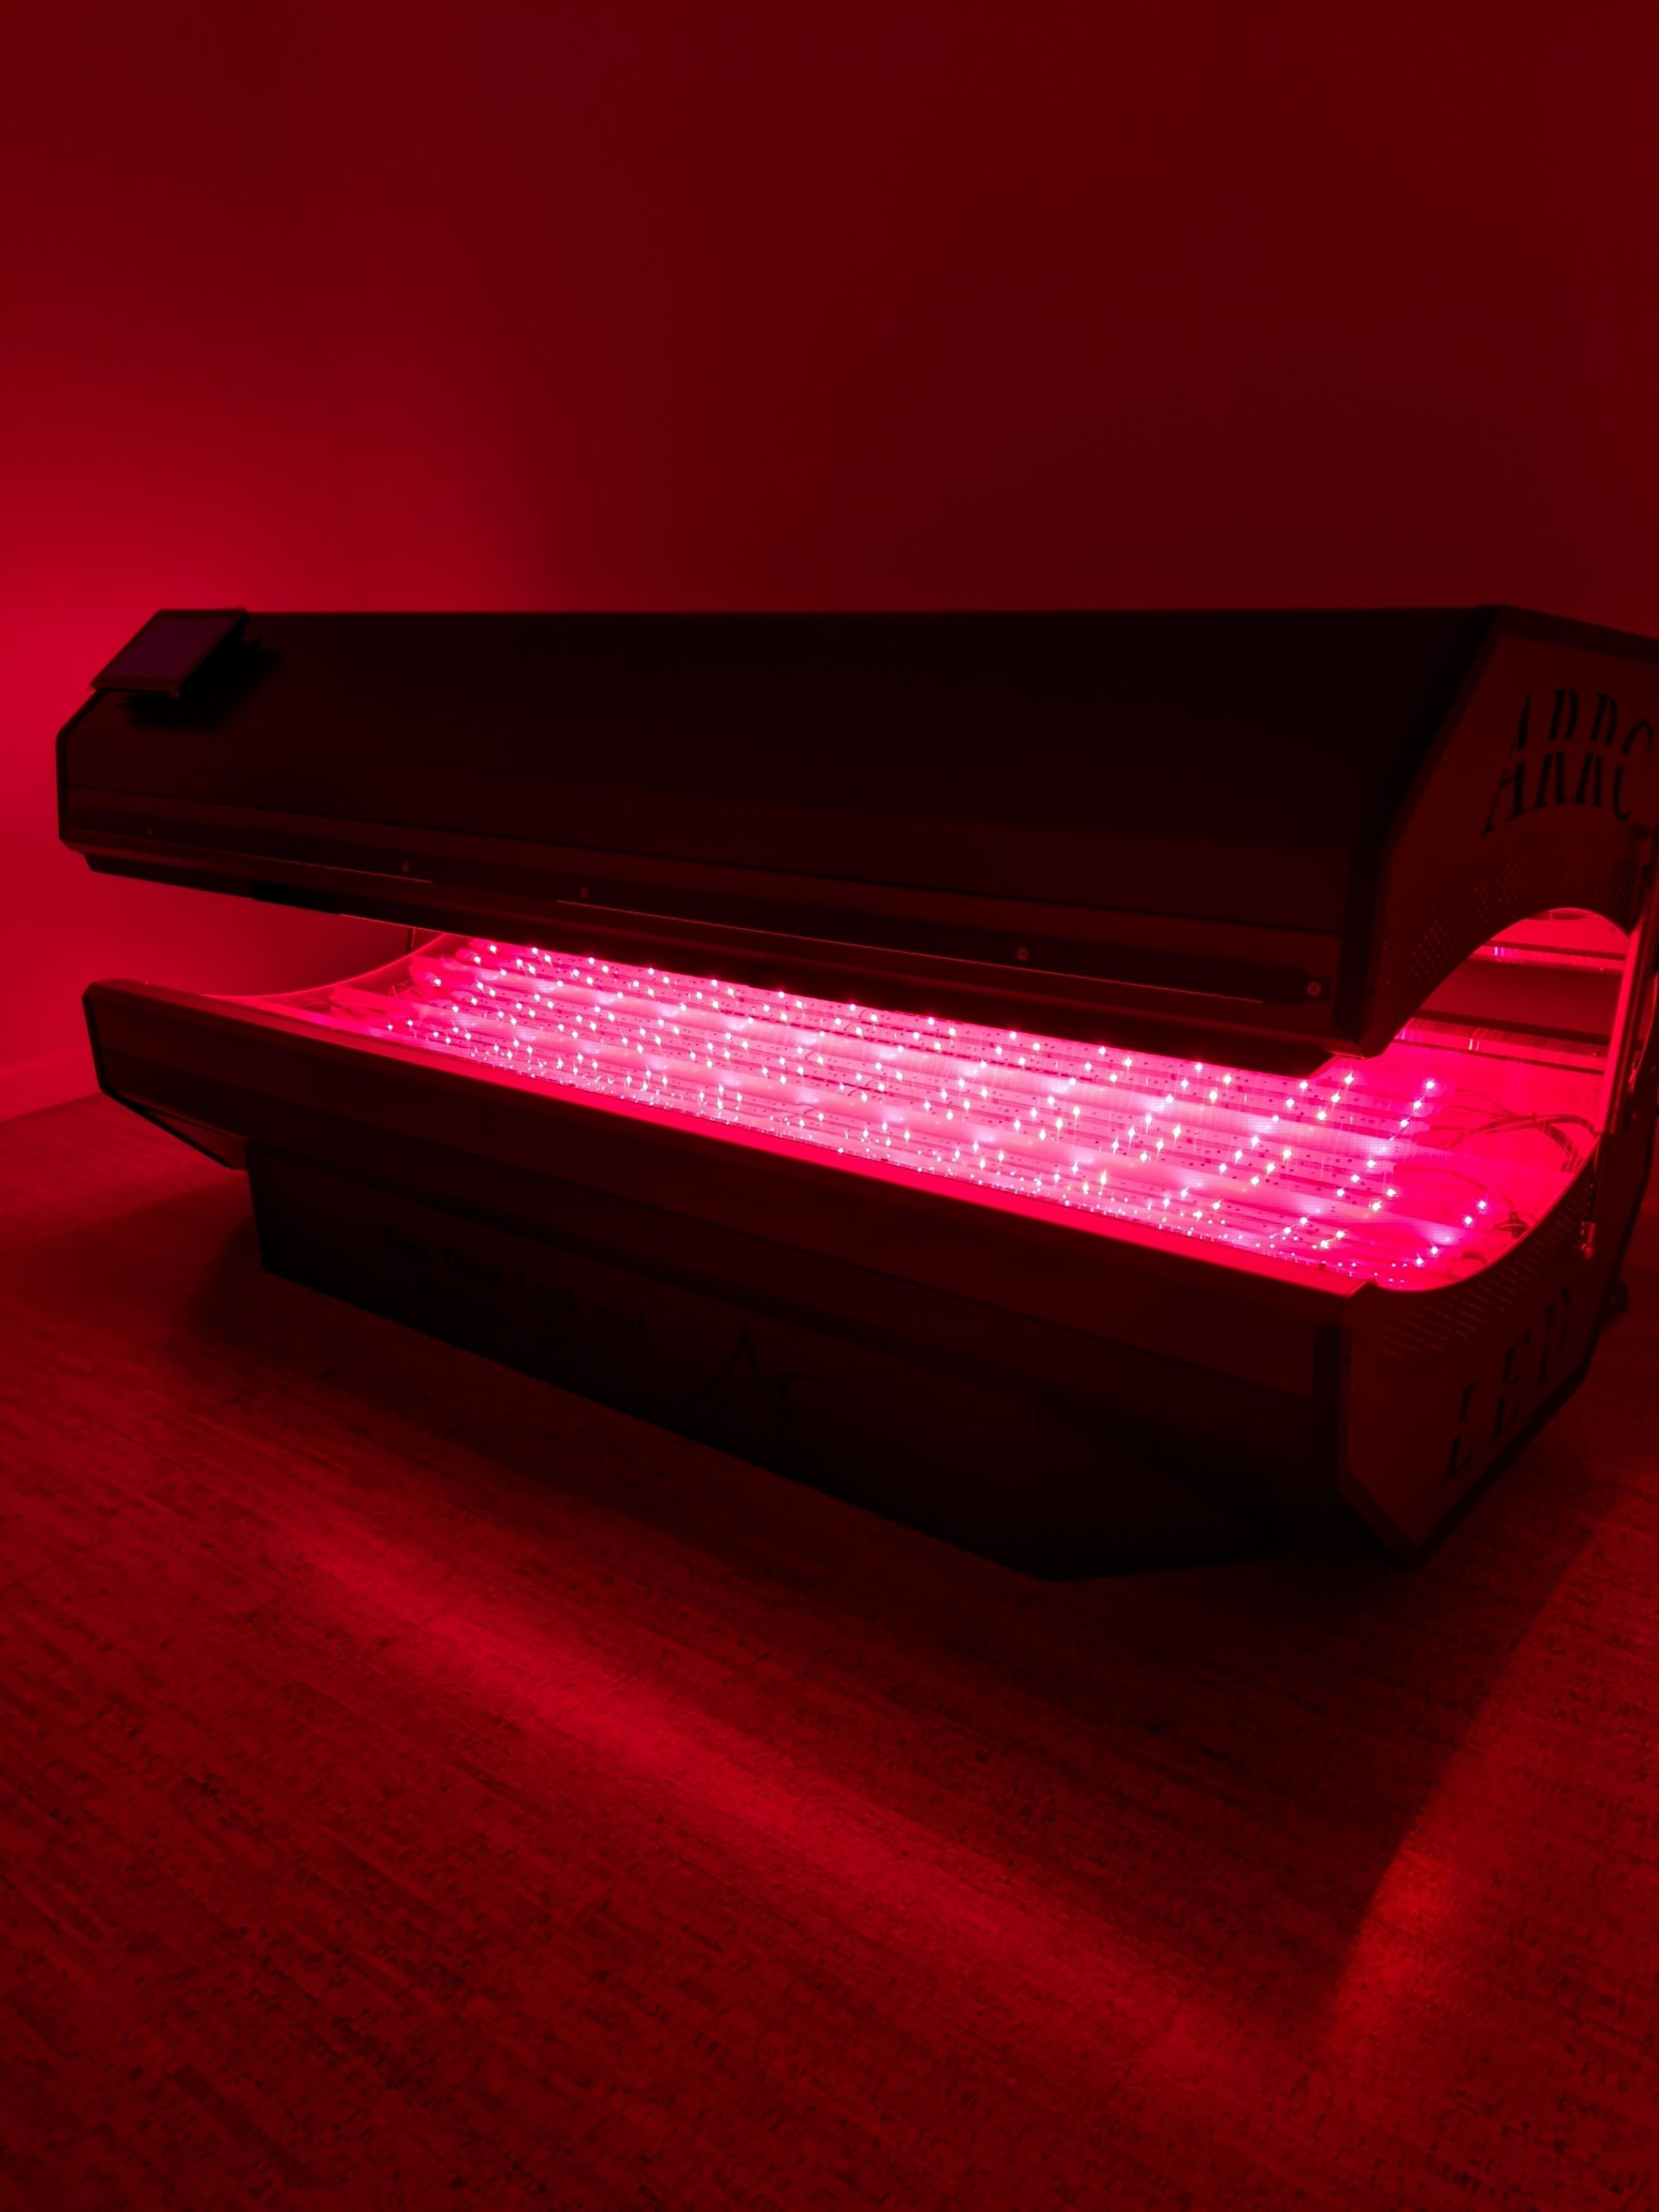 Red Light Therapy Bed at Sloco